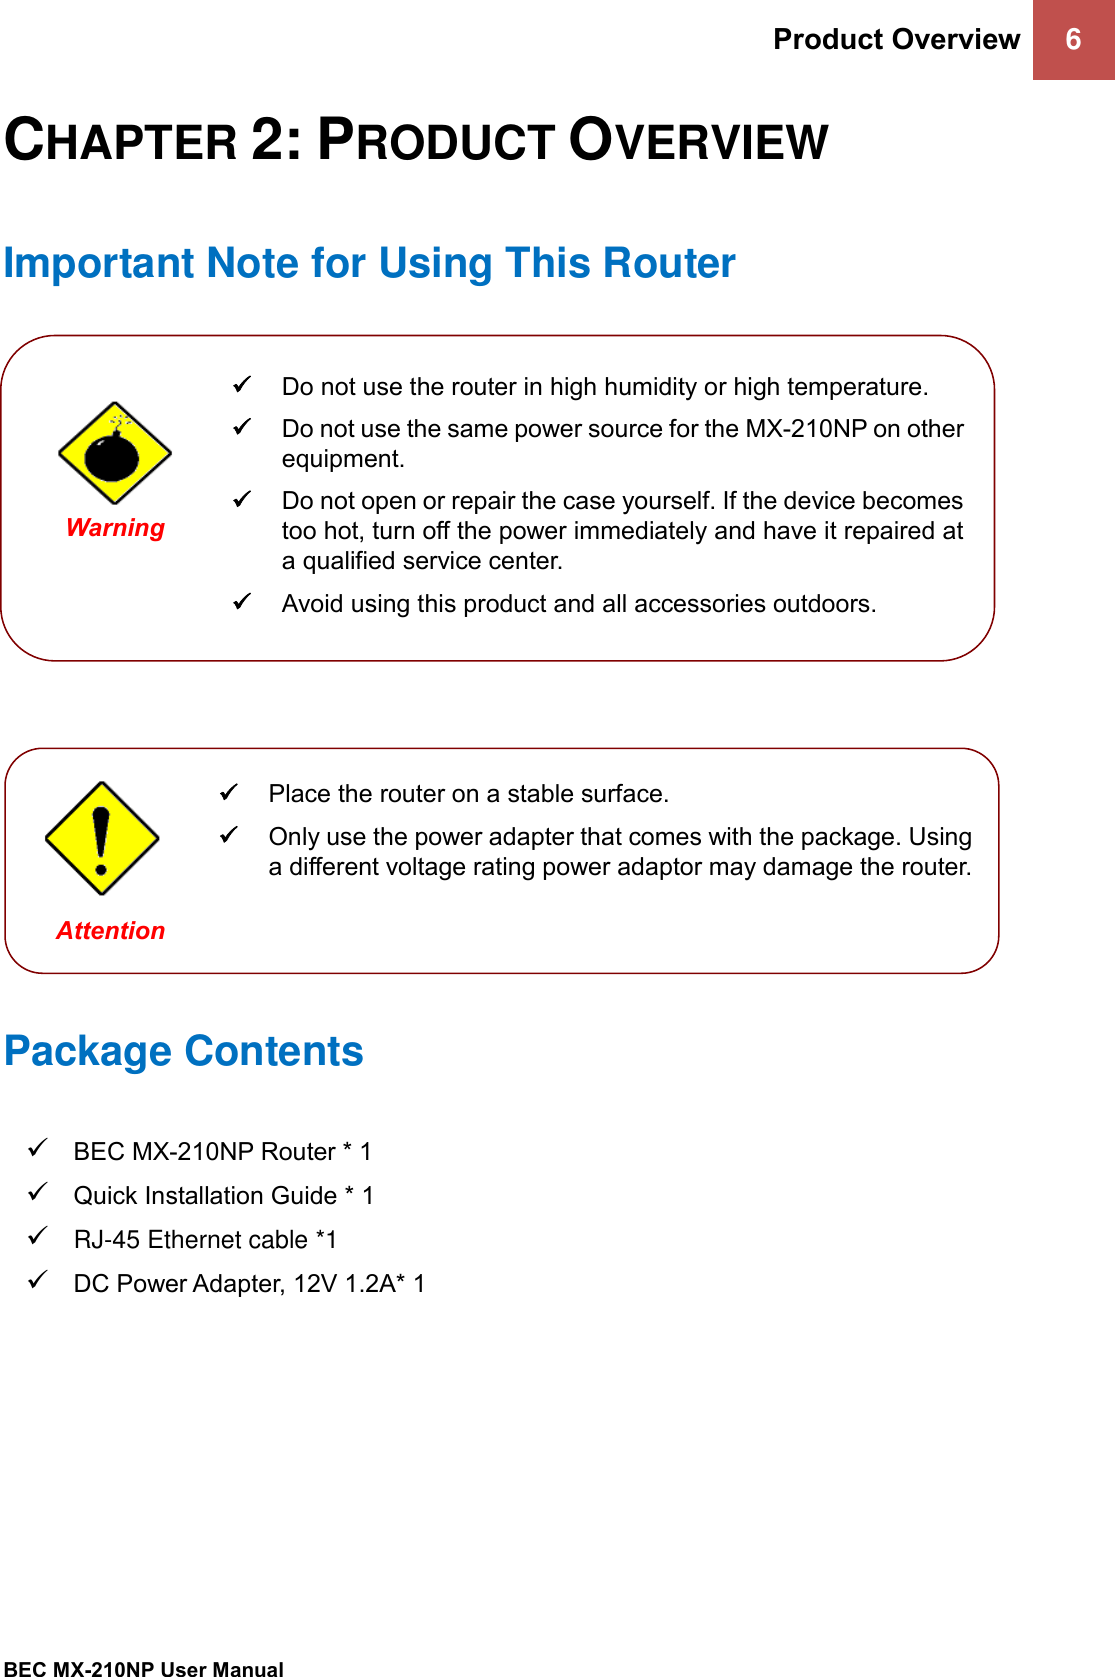 Product Overview 6   BEC MX-210NP User Manual  CHAPTER 2: PRODUCT OVERVIEW Important Note for Using This Router                 Package Contents ✓ BEC MX-210NP Router * 1 ✓ Quick Installation Guide * 1 ✓ RJ-45 Ethernet cable *1 ✓ DC Power Adapter, 12V 1.2A* 1    ✓ Do not use the router in high humidity or high temperature. ✓ Do not use the same power source for the MX-210NP on other equipment. ✓ Do not open or repair the case yourself. If the device becomes too hot, turn off the power immediately and have it repaired at a qualified service center.  ✓ Avoid using this product and all accessories outdoors.   Warning  ✓ Place the router on a stable surface. ✓ Only use the power adapter that comes with the package. Using a different voltage rating power adaptor may damage the router.  Attention 